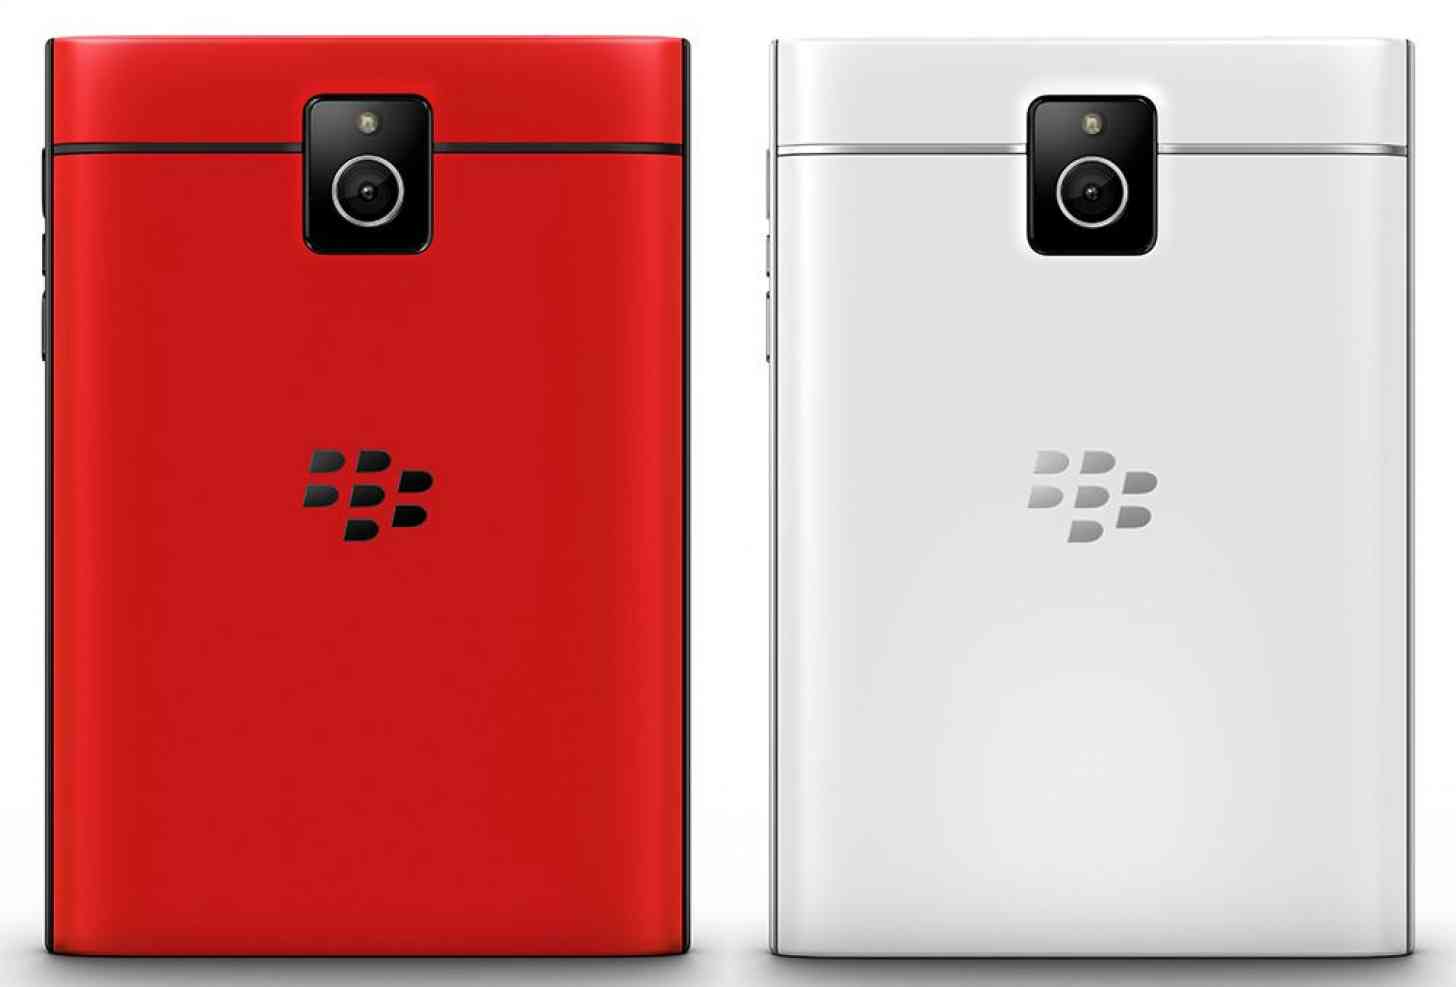 Red and white BlackBerry Passport models rear